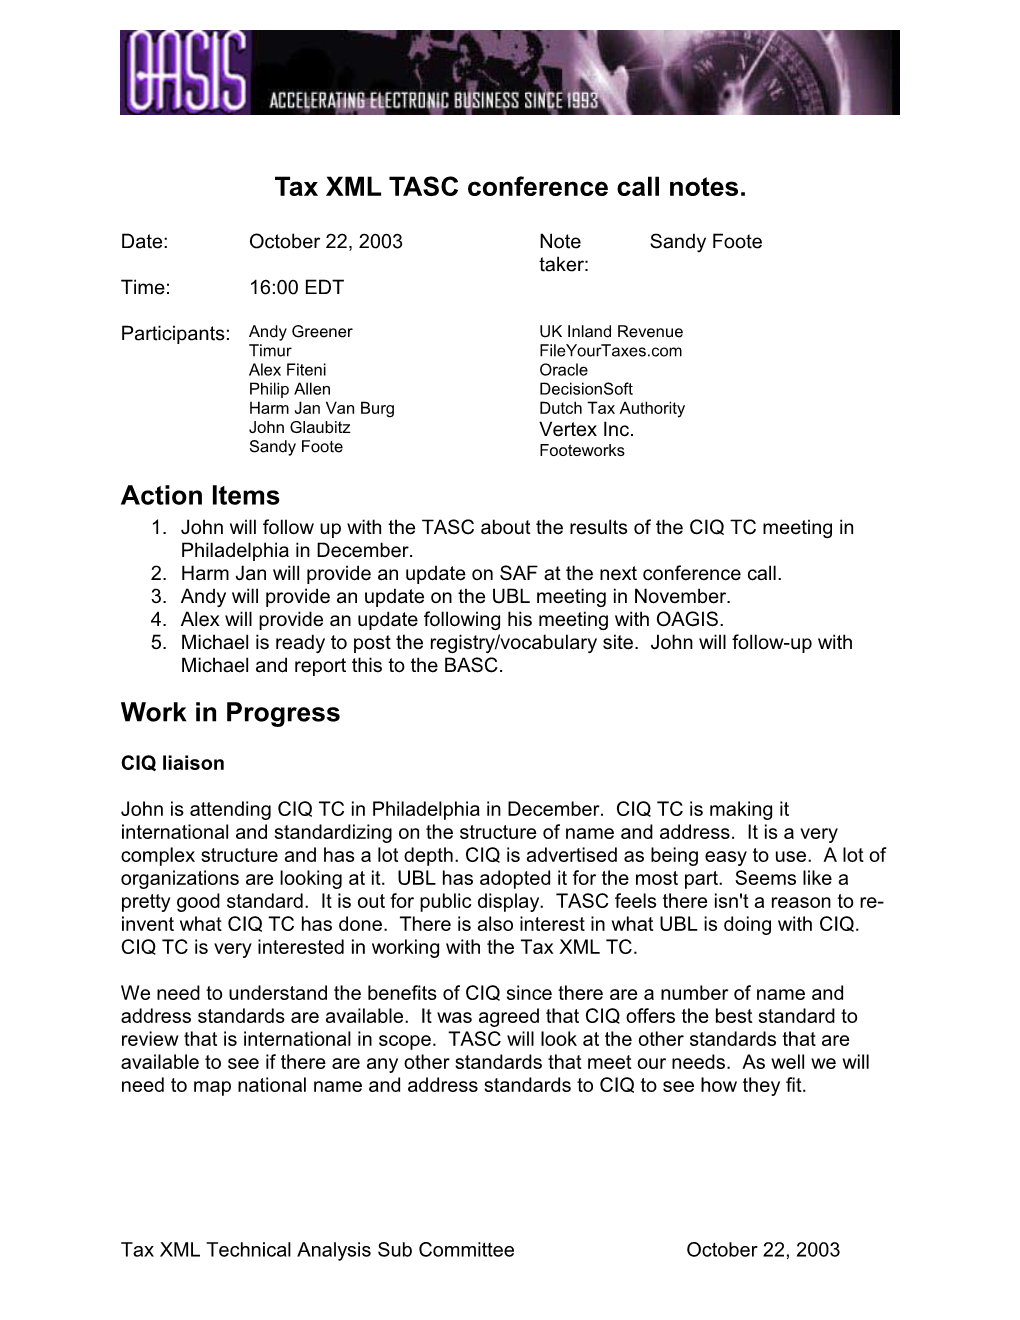 Tax XML BASC Conference Call Notes